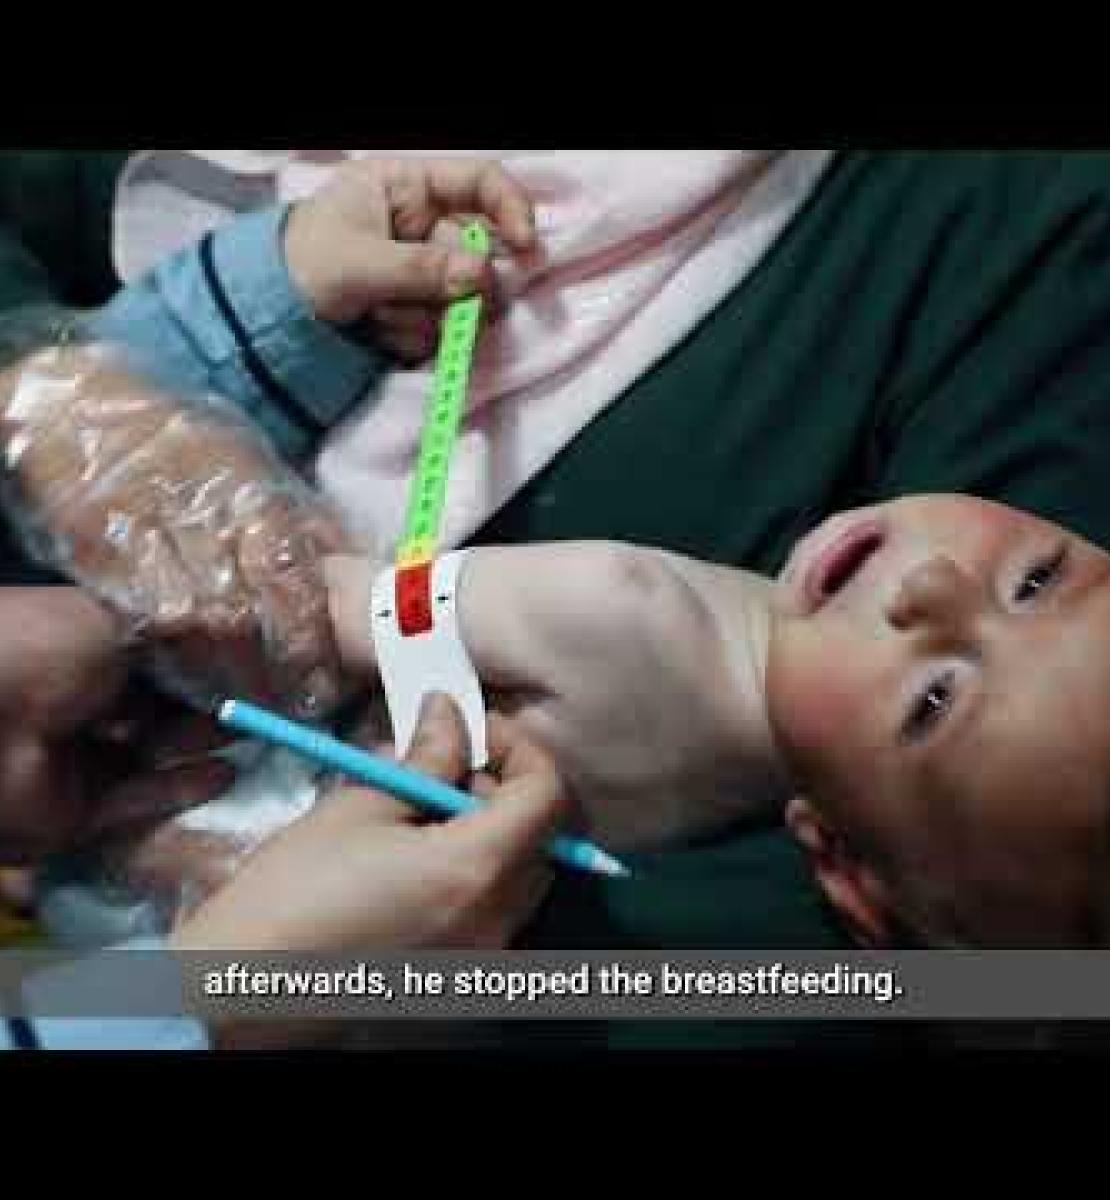 Working together to save the lives of children with malnutrition in Northeast Syria